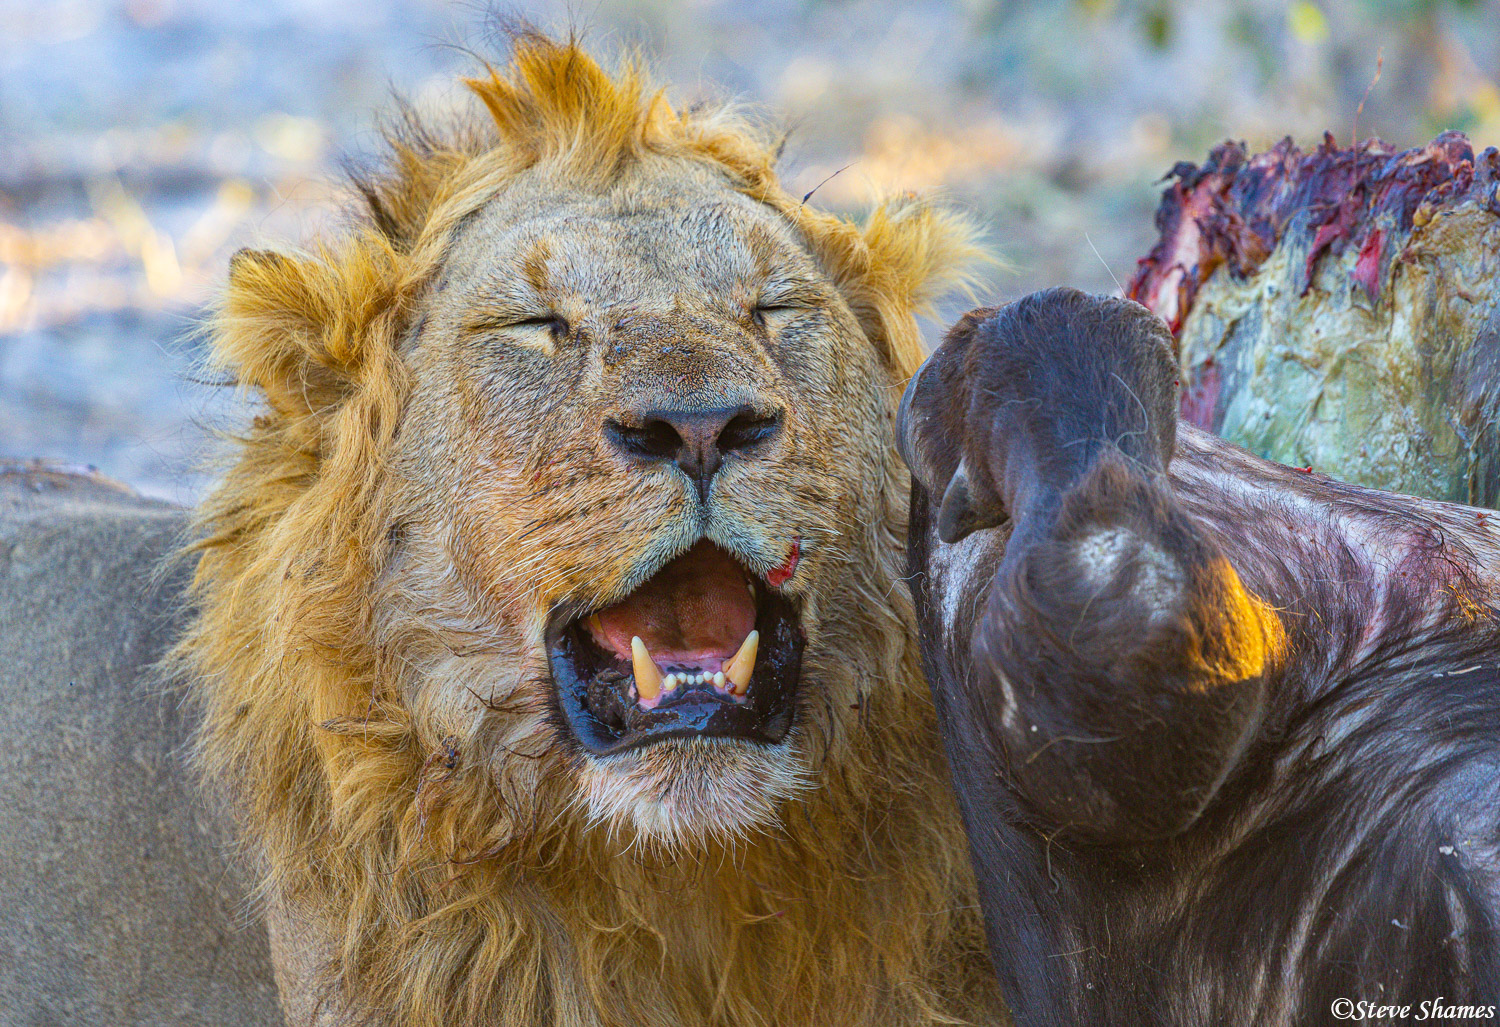 Here is a tired looking lion. I know this gallery is "Predators in Action", but Its hard work eating a cape buffalo, and this...